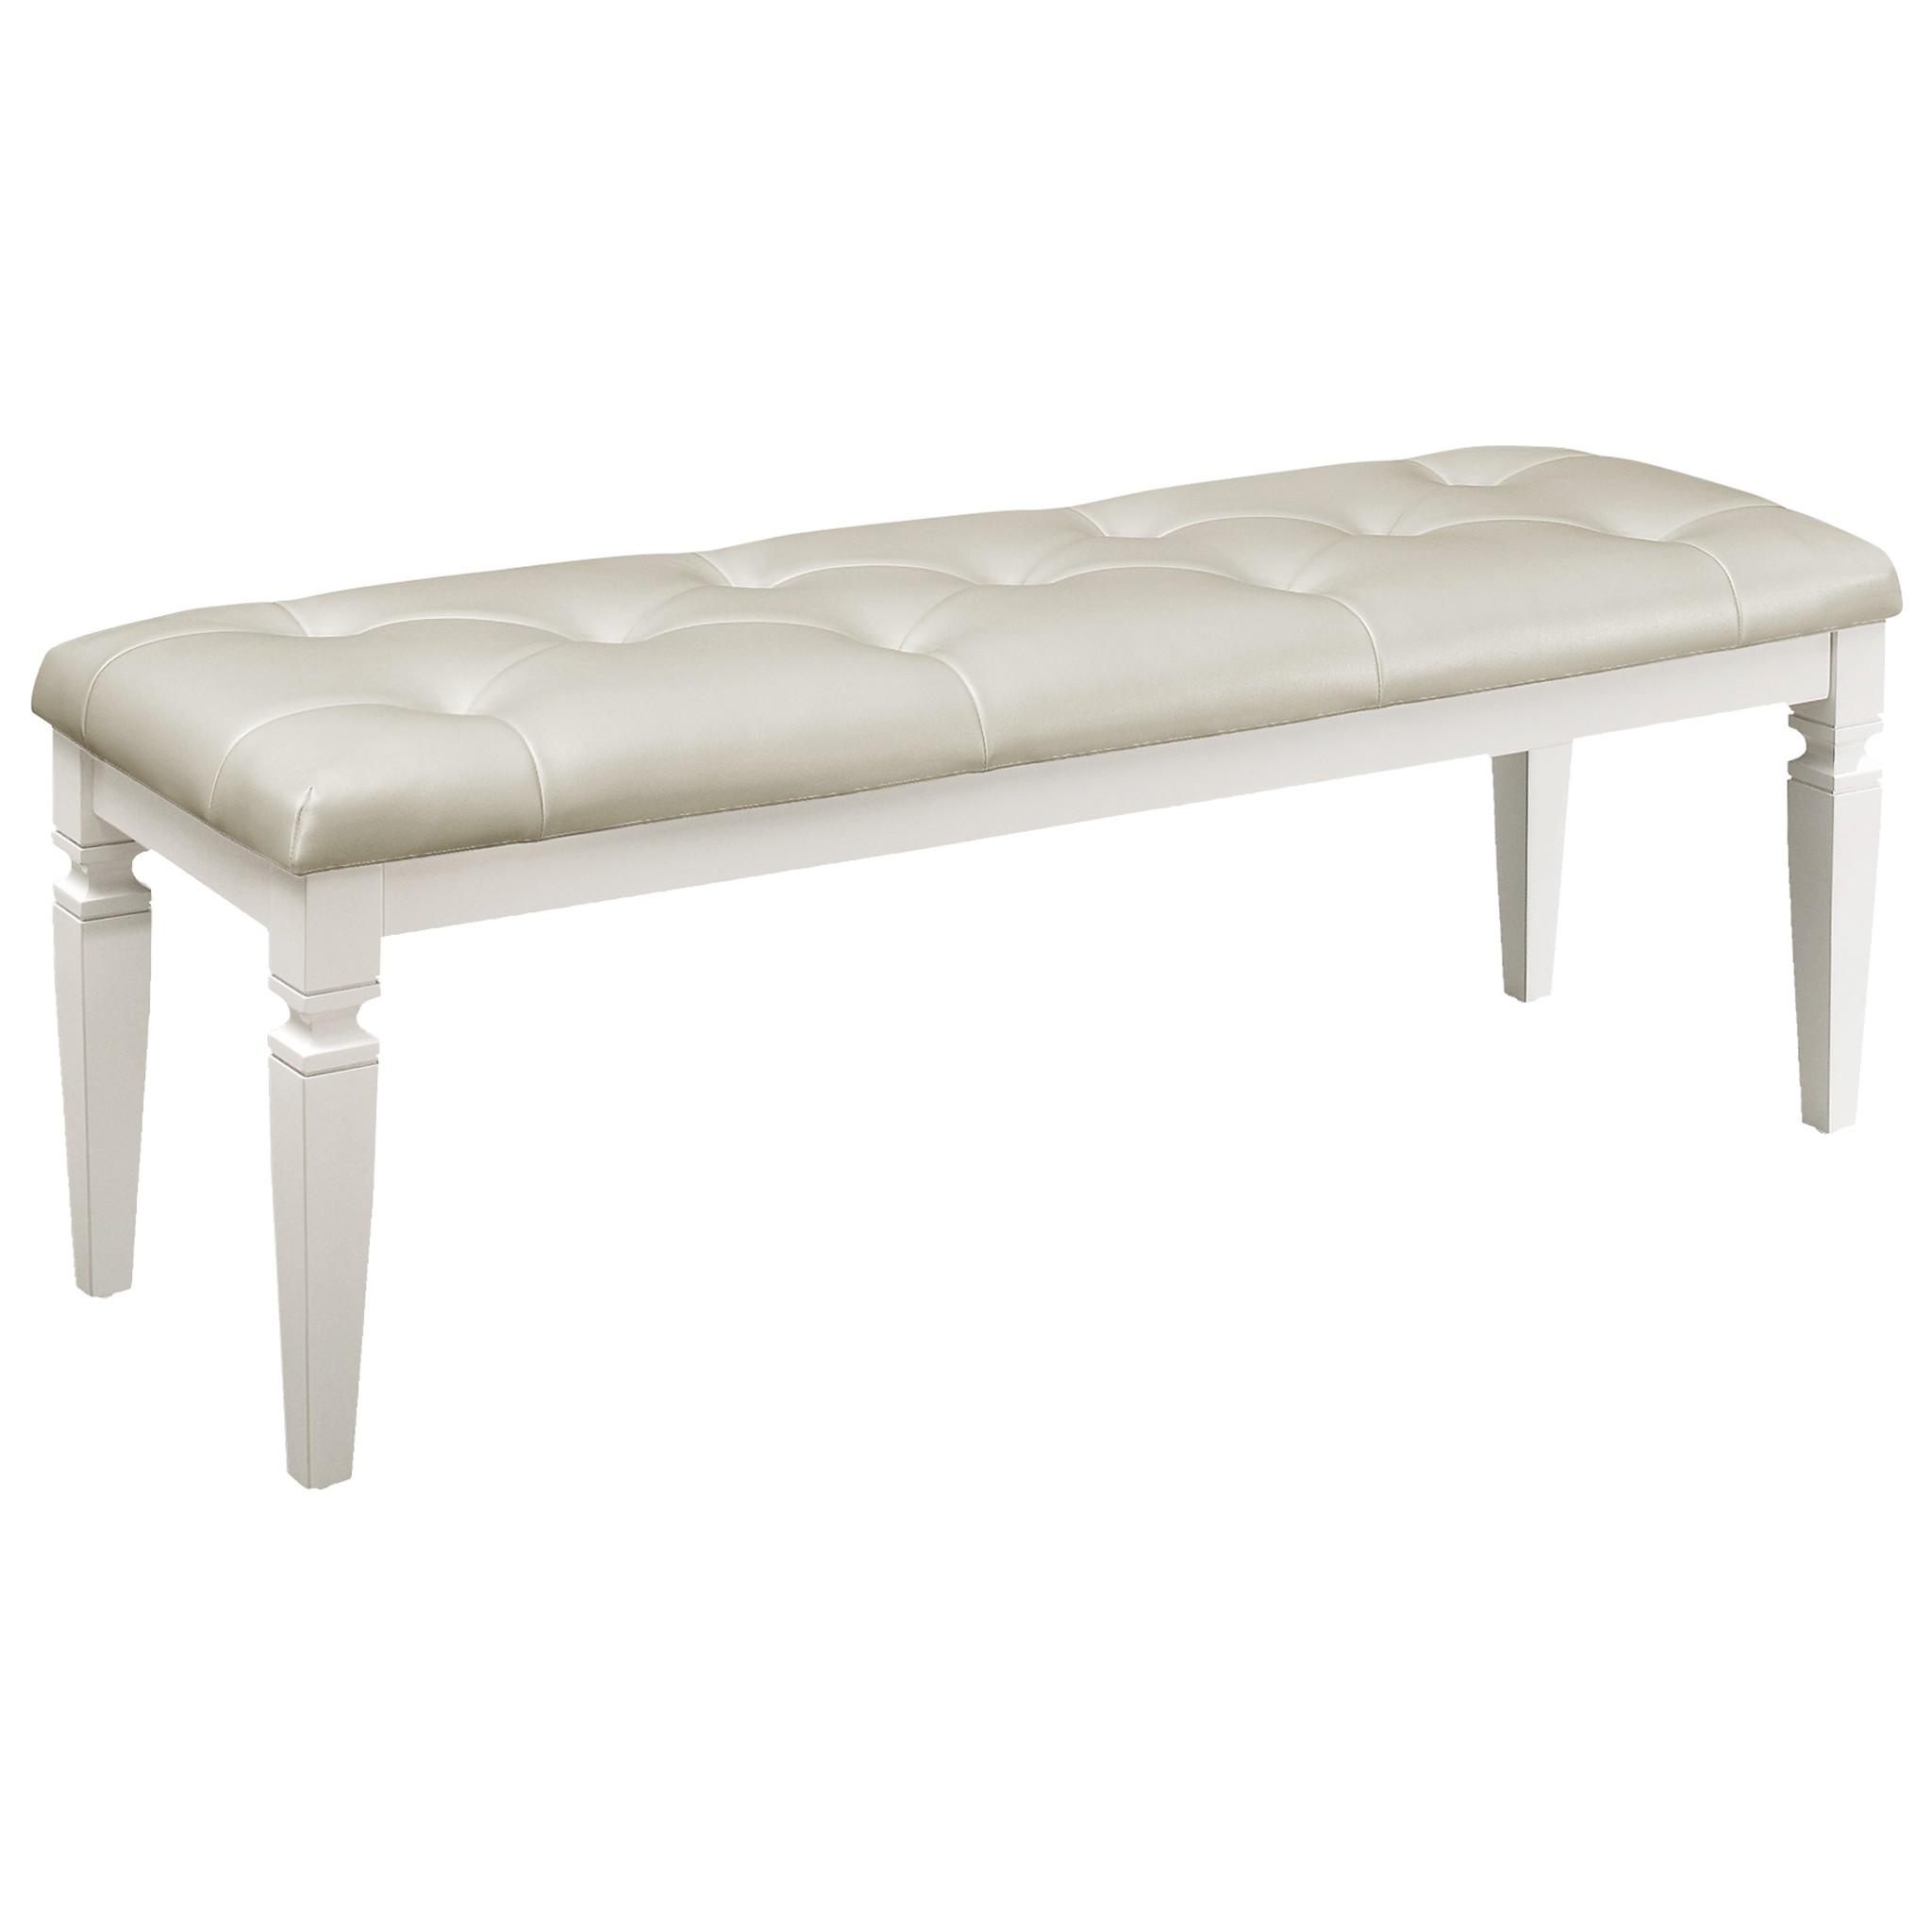 Modern Bed Bench 1916W-FBH Allura 1916W-FBH in White Faux Leather